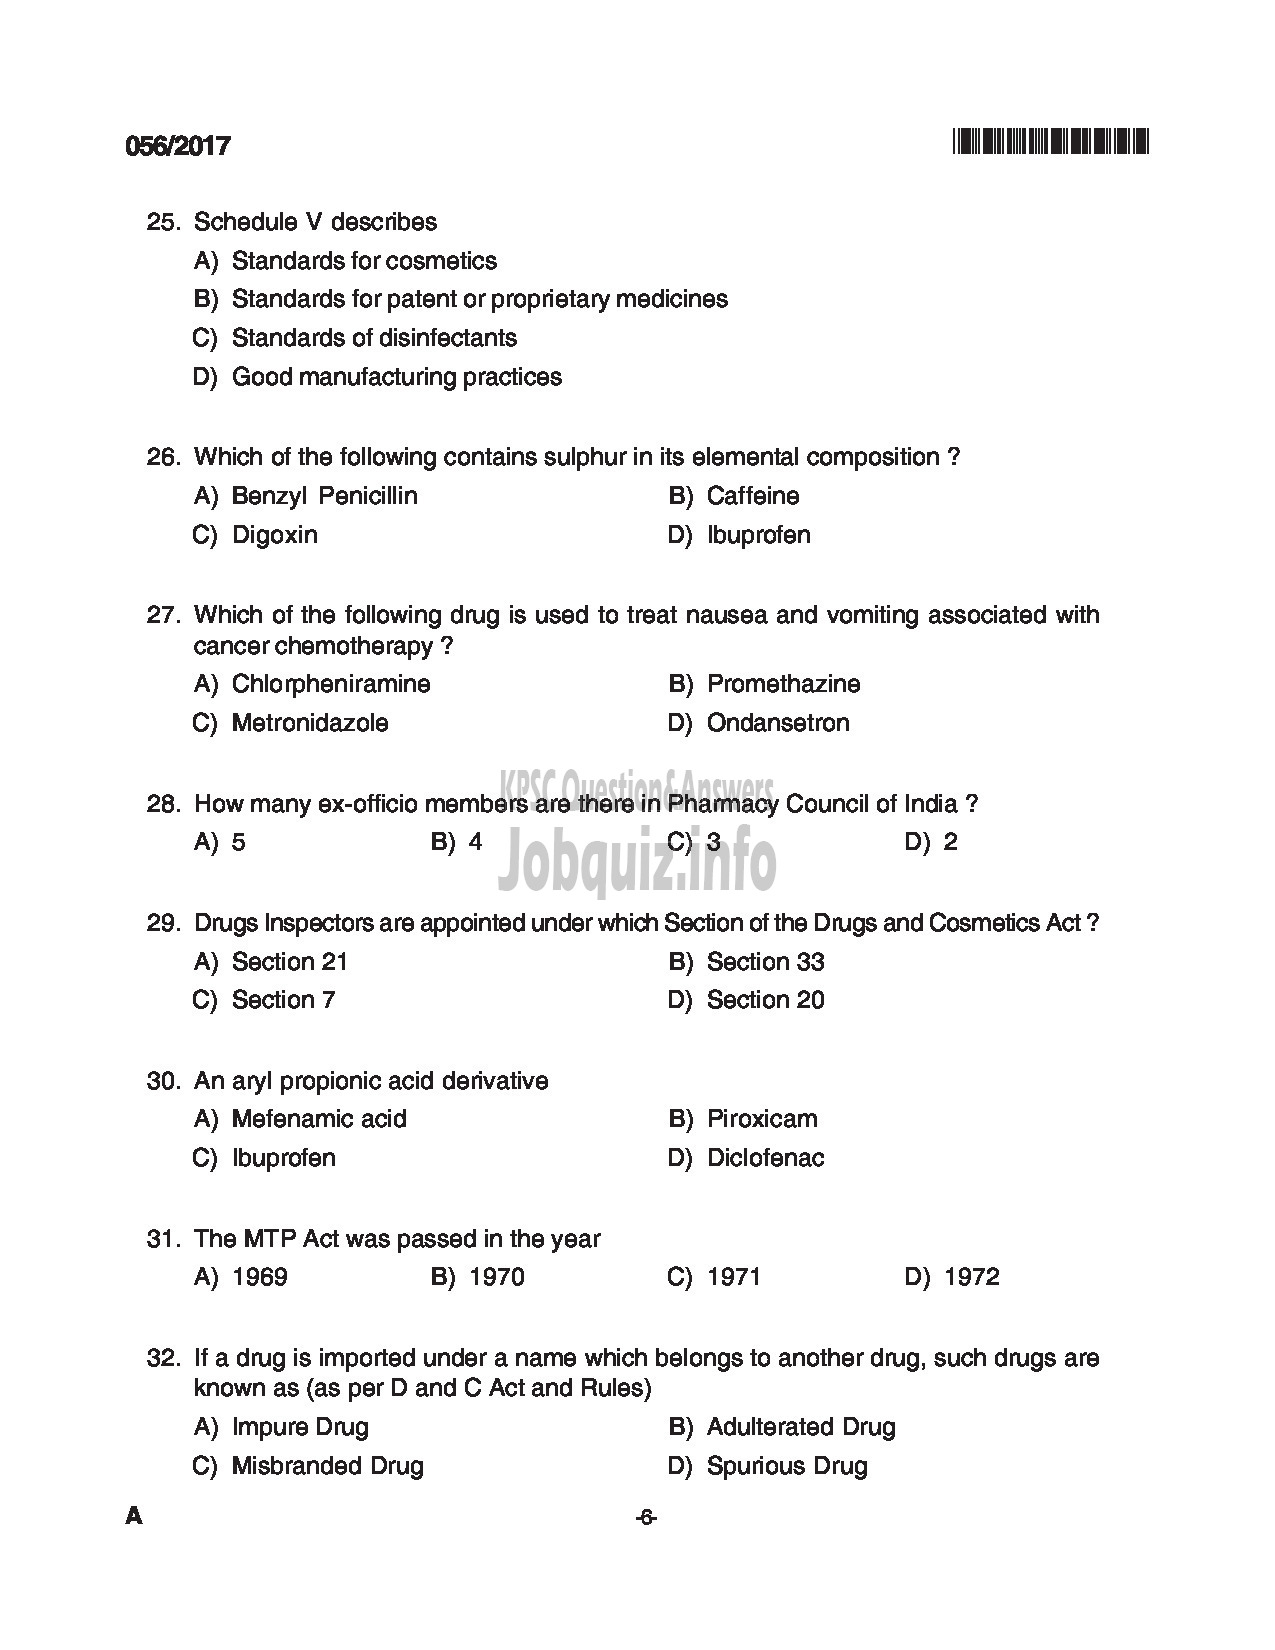 Kerala PSC Question Paper - PHARMACIST GRADE II INSURANCE MEDICAL SERVICES QUESTION PAPER-6